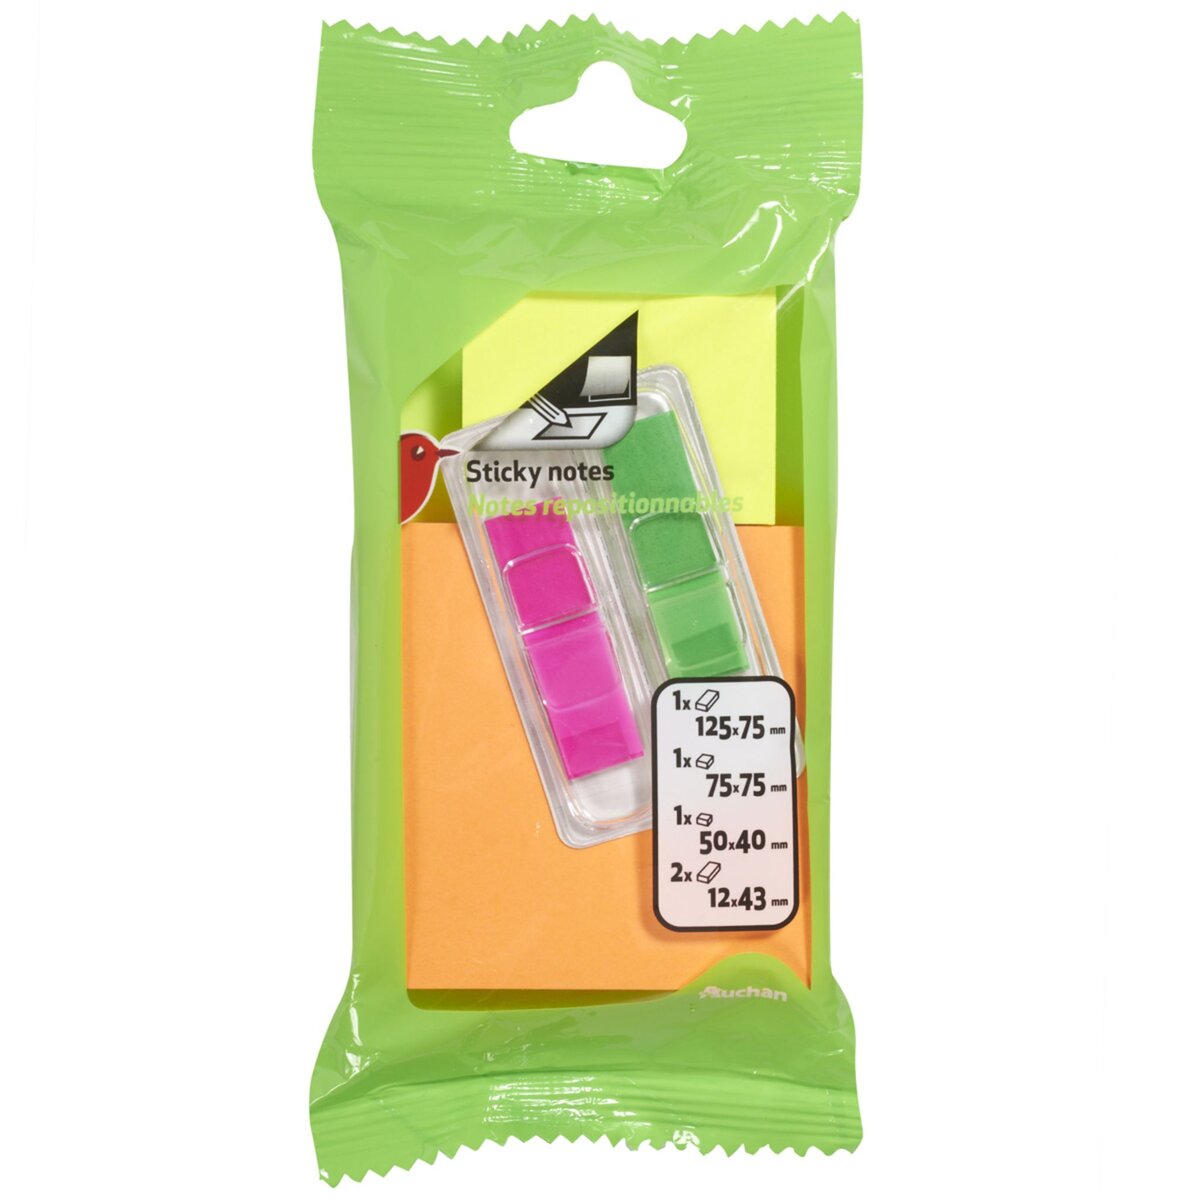 AUCHAN 3 Sticky notes + 2 sets marque page